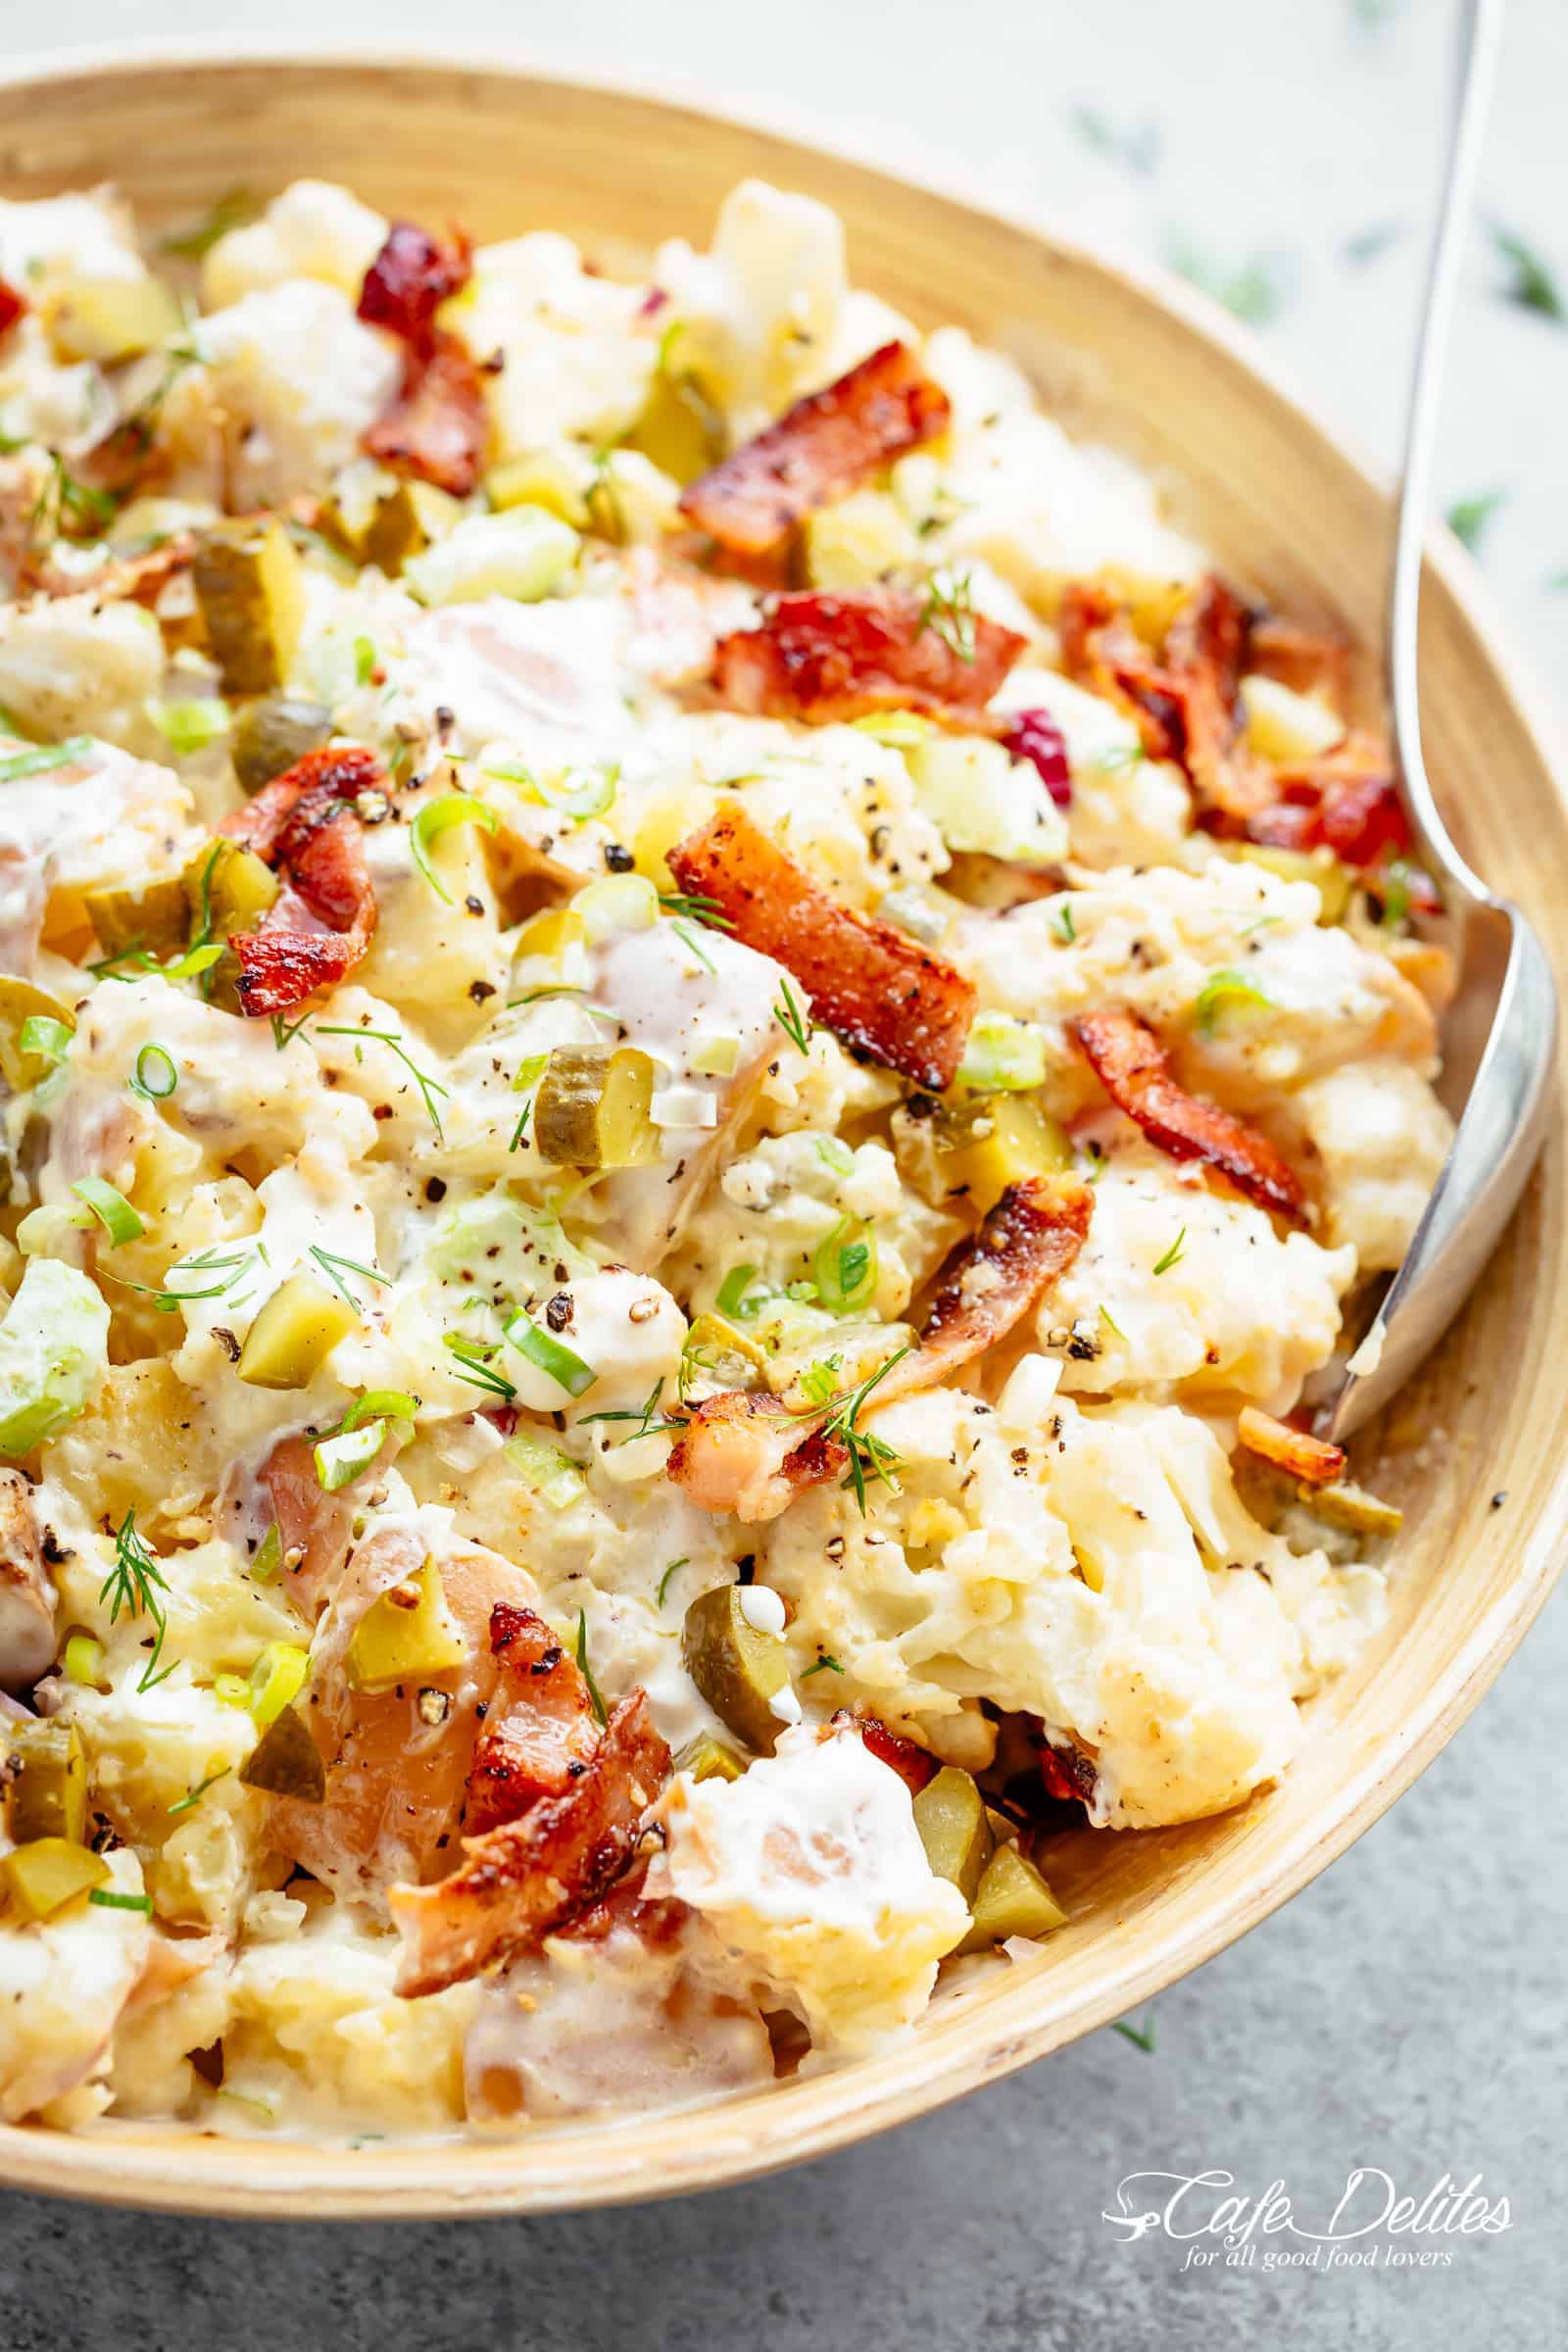 Potato Salad with Bacon, Eggs and Dill Pickles